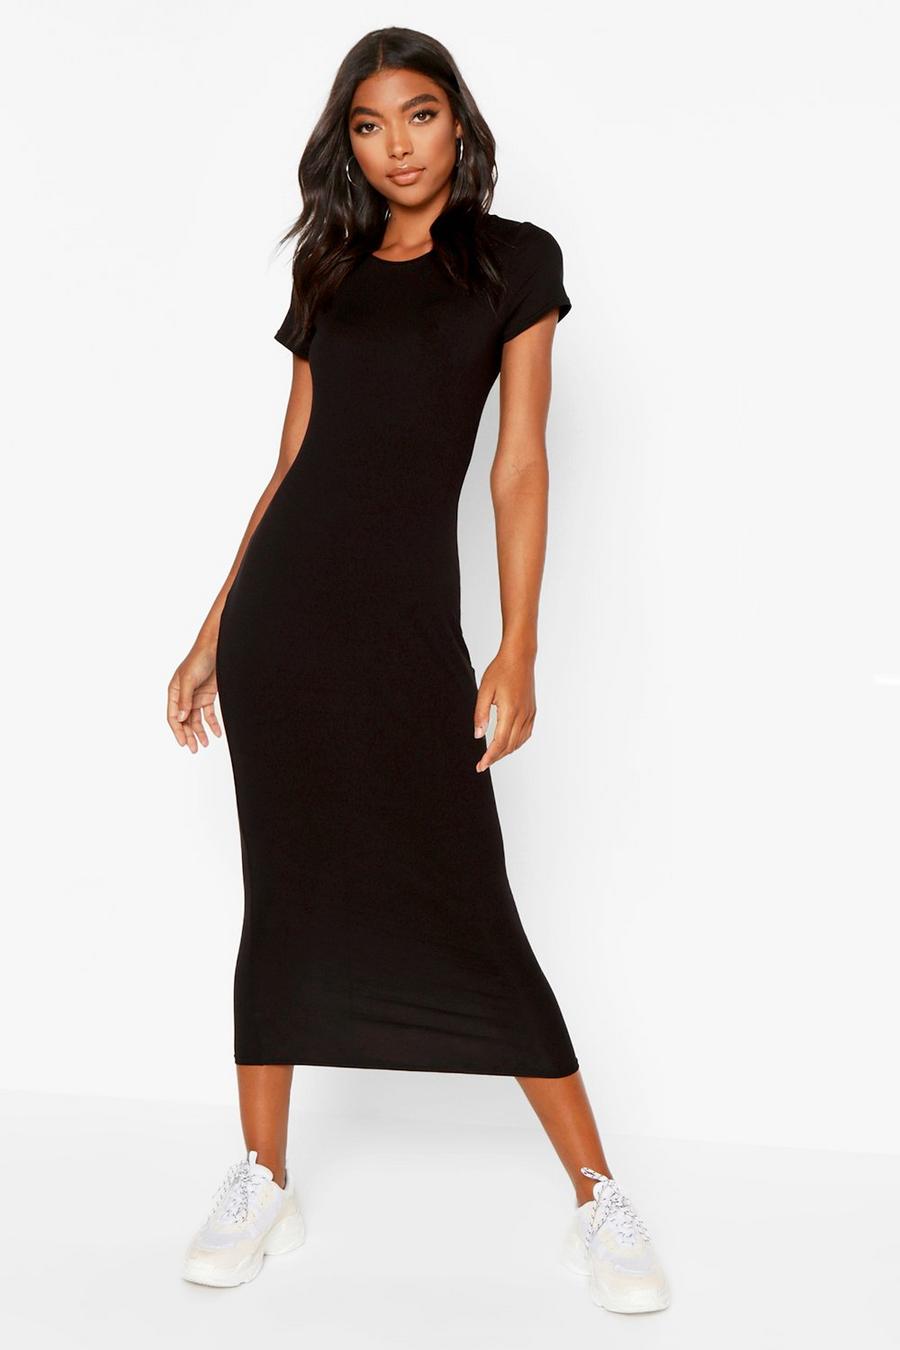 Black Tall Cap Sleeve Bodycon Dress image number 1